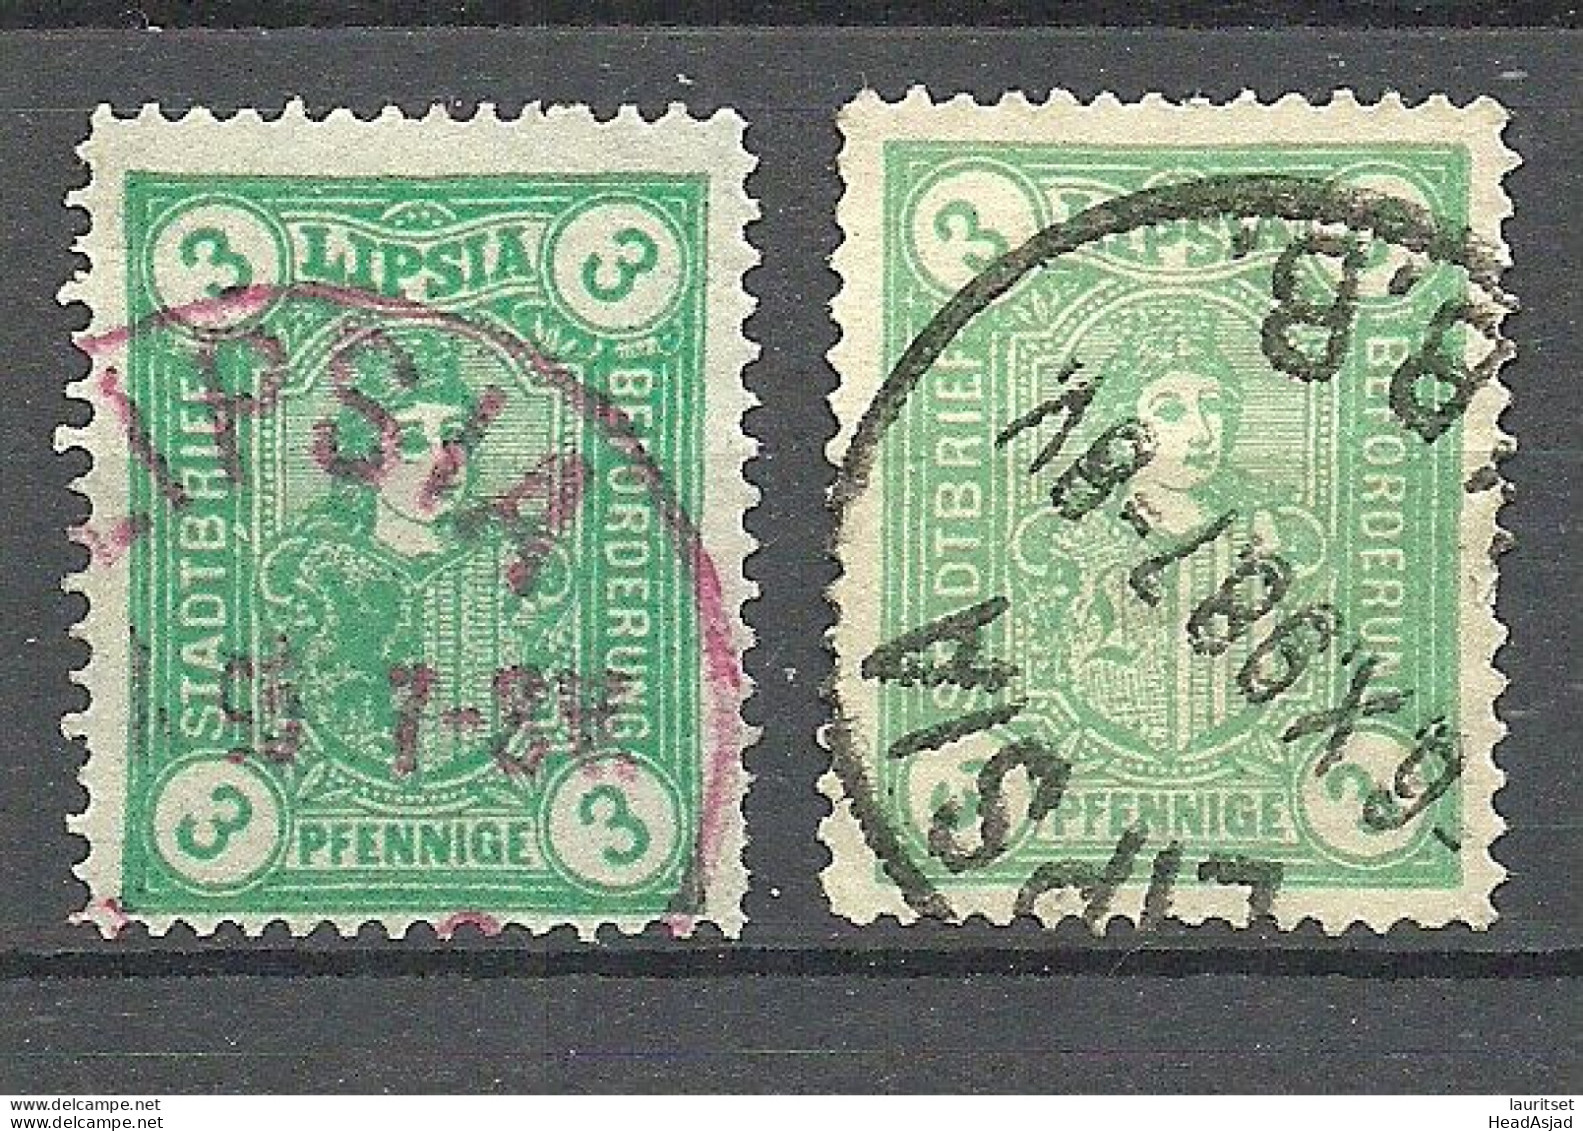 GERMANY O 1896-1898 LIPSIA LEIPZIG Privater Stadtpost Local City Post 3 Pf. Hell + Dunkel / Dark + Light Shade - Correos Privados & Locales